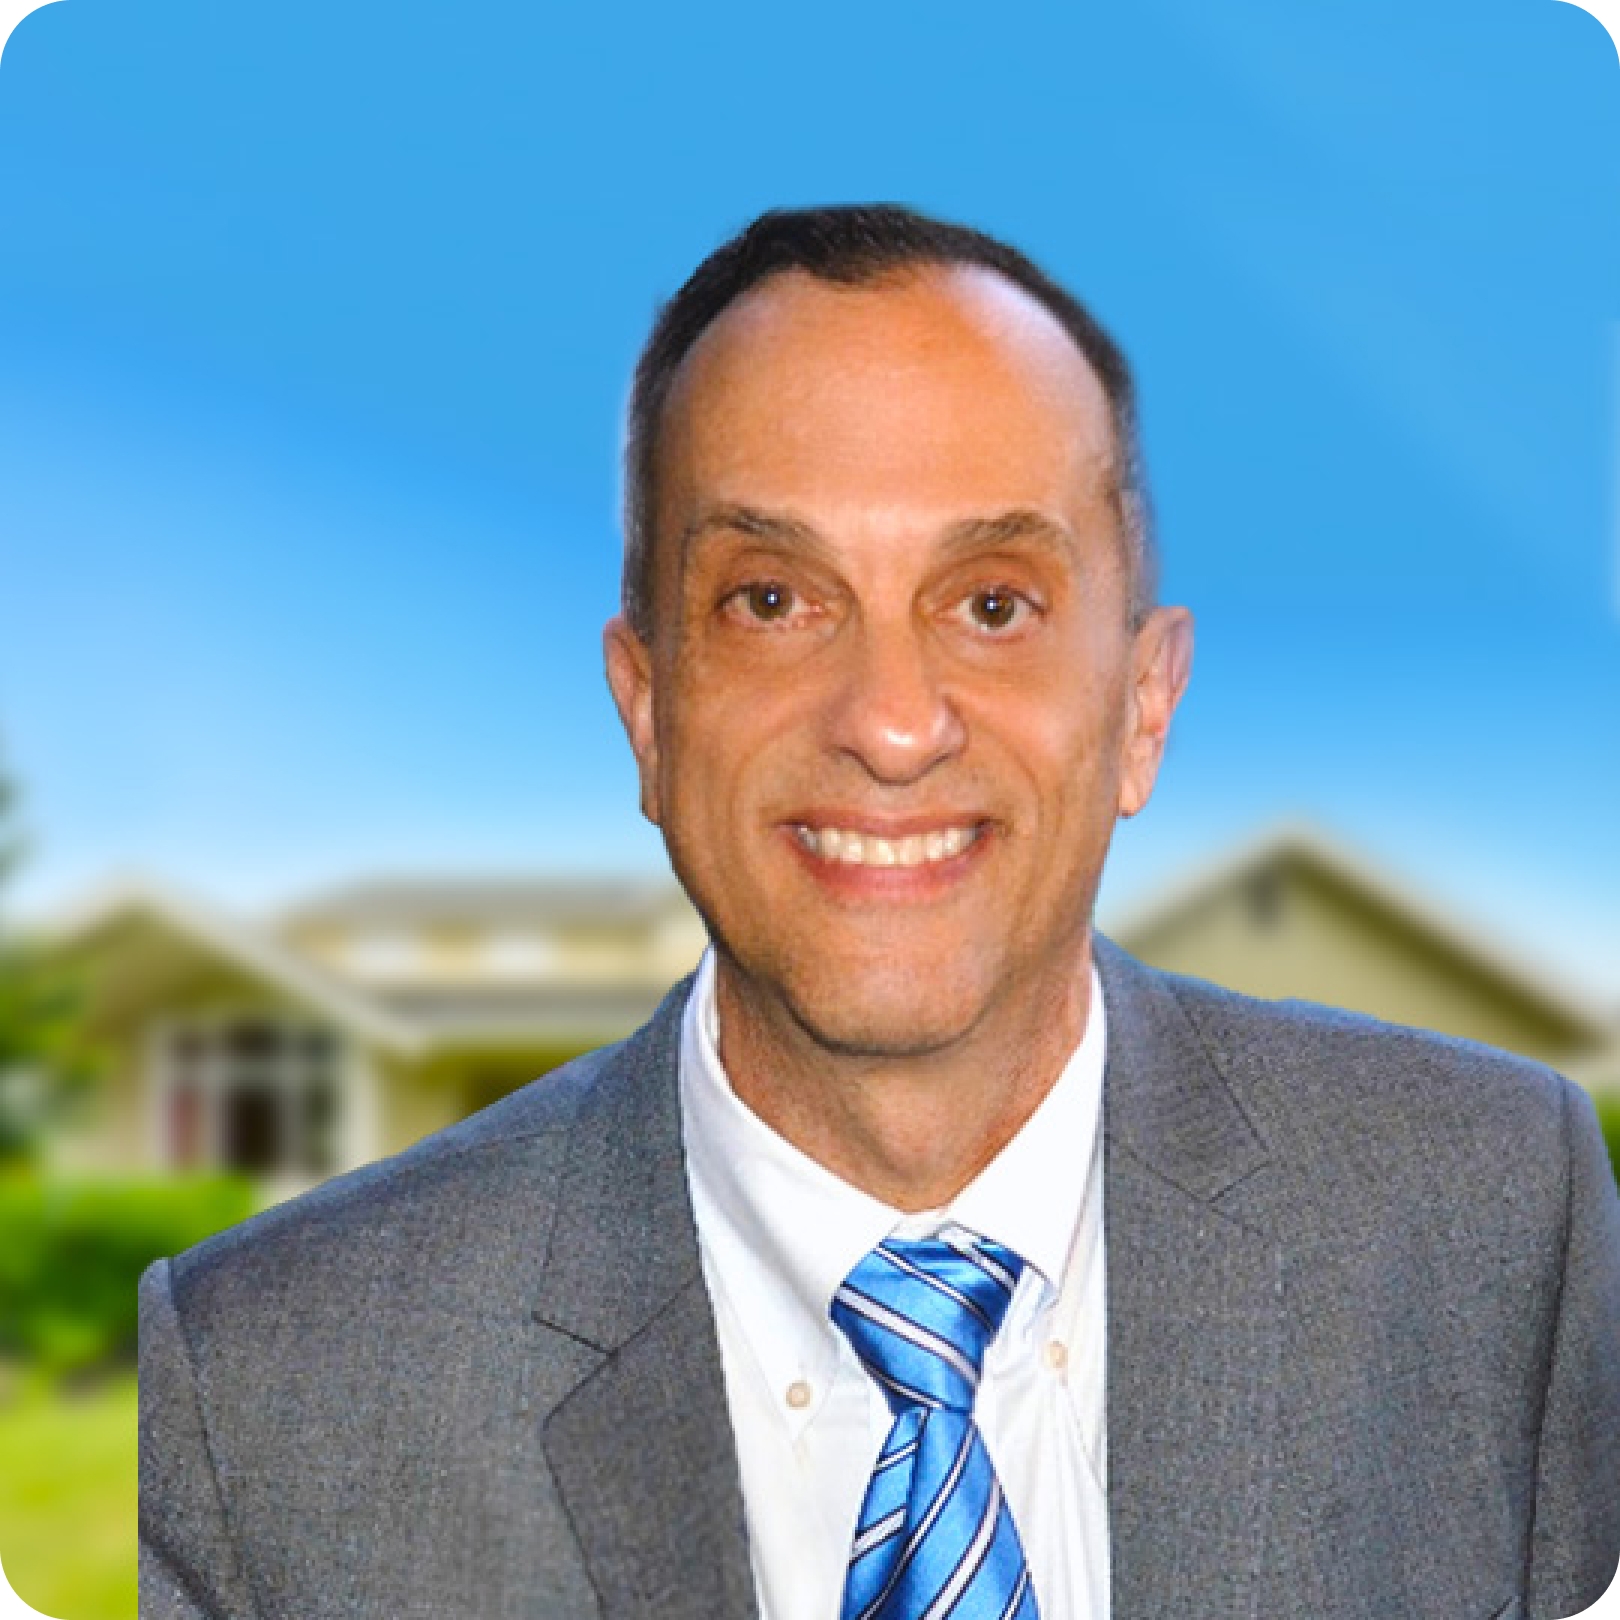 An older man in a suit smiles and has a house behind him